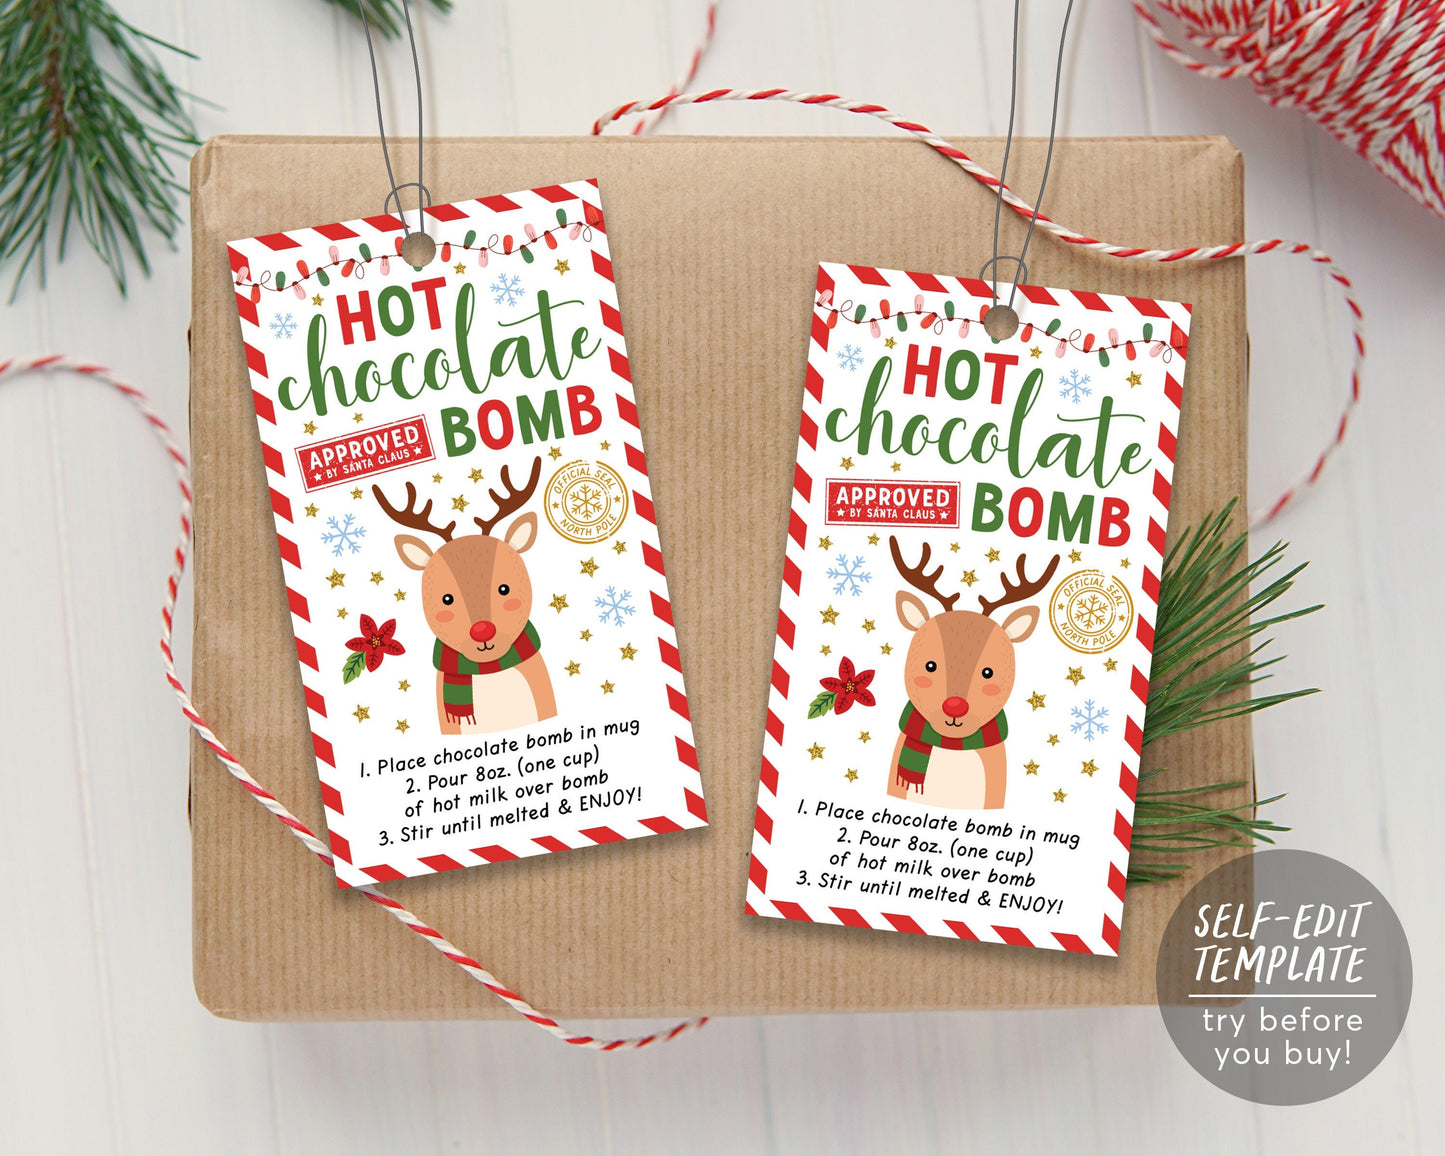 Christmas Reindeer Hot Chocolate Bomb Tag Editable Template, Santa Hot Cocoa Bomb Tags Sticker Labels Printable, Christmas Party Favor